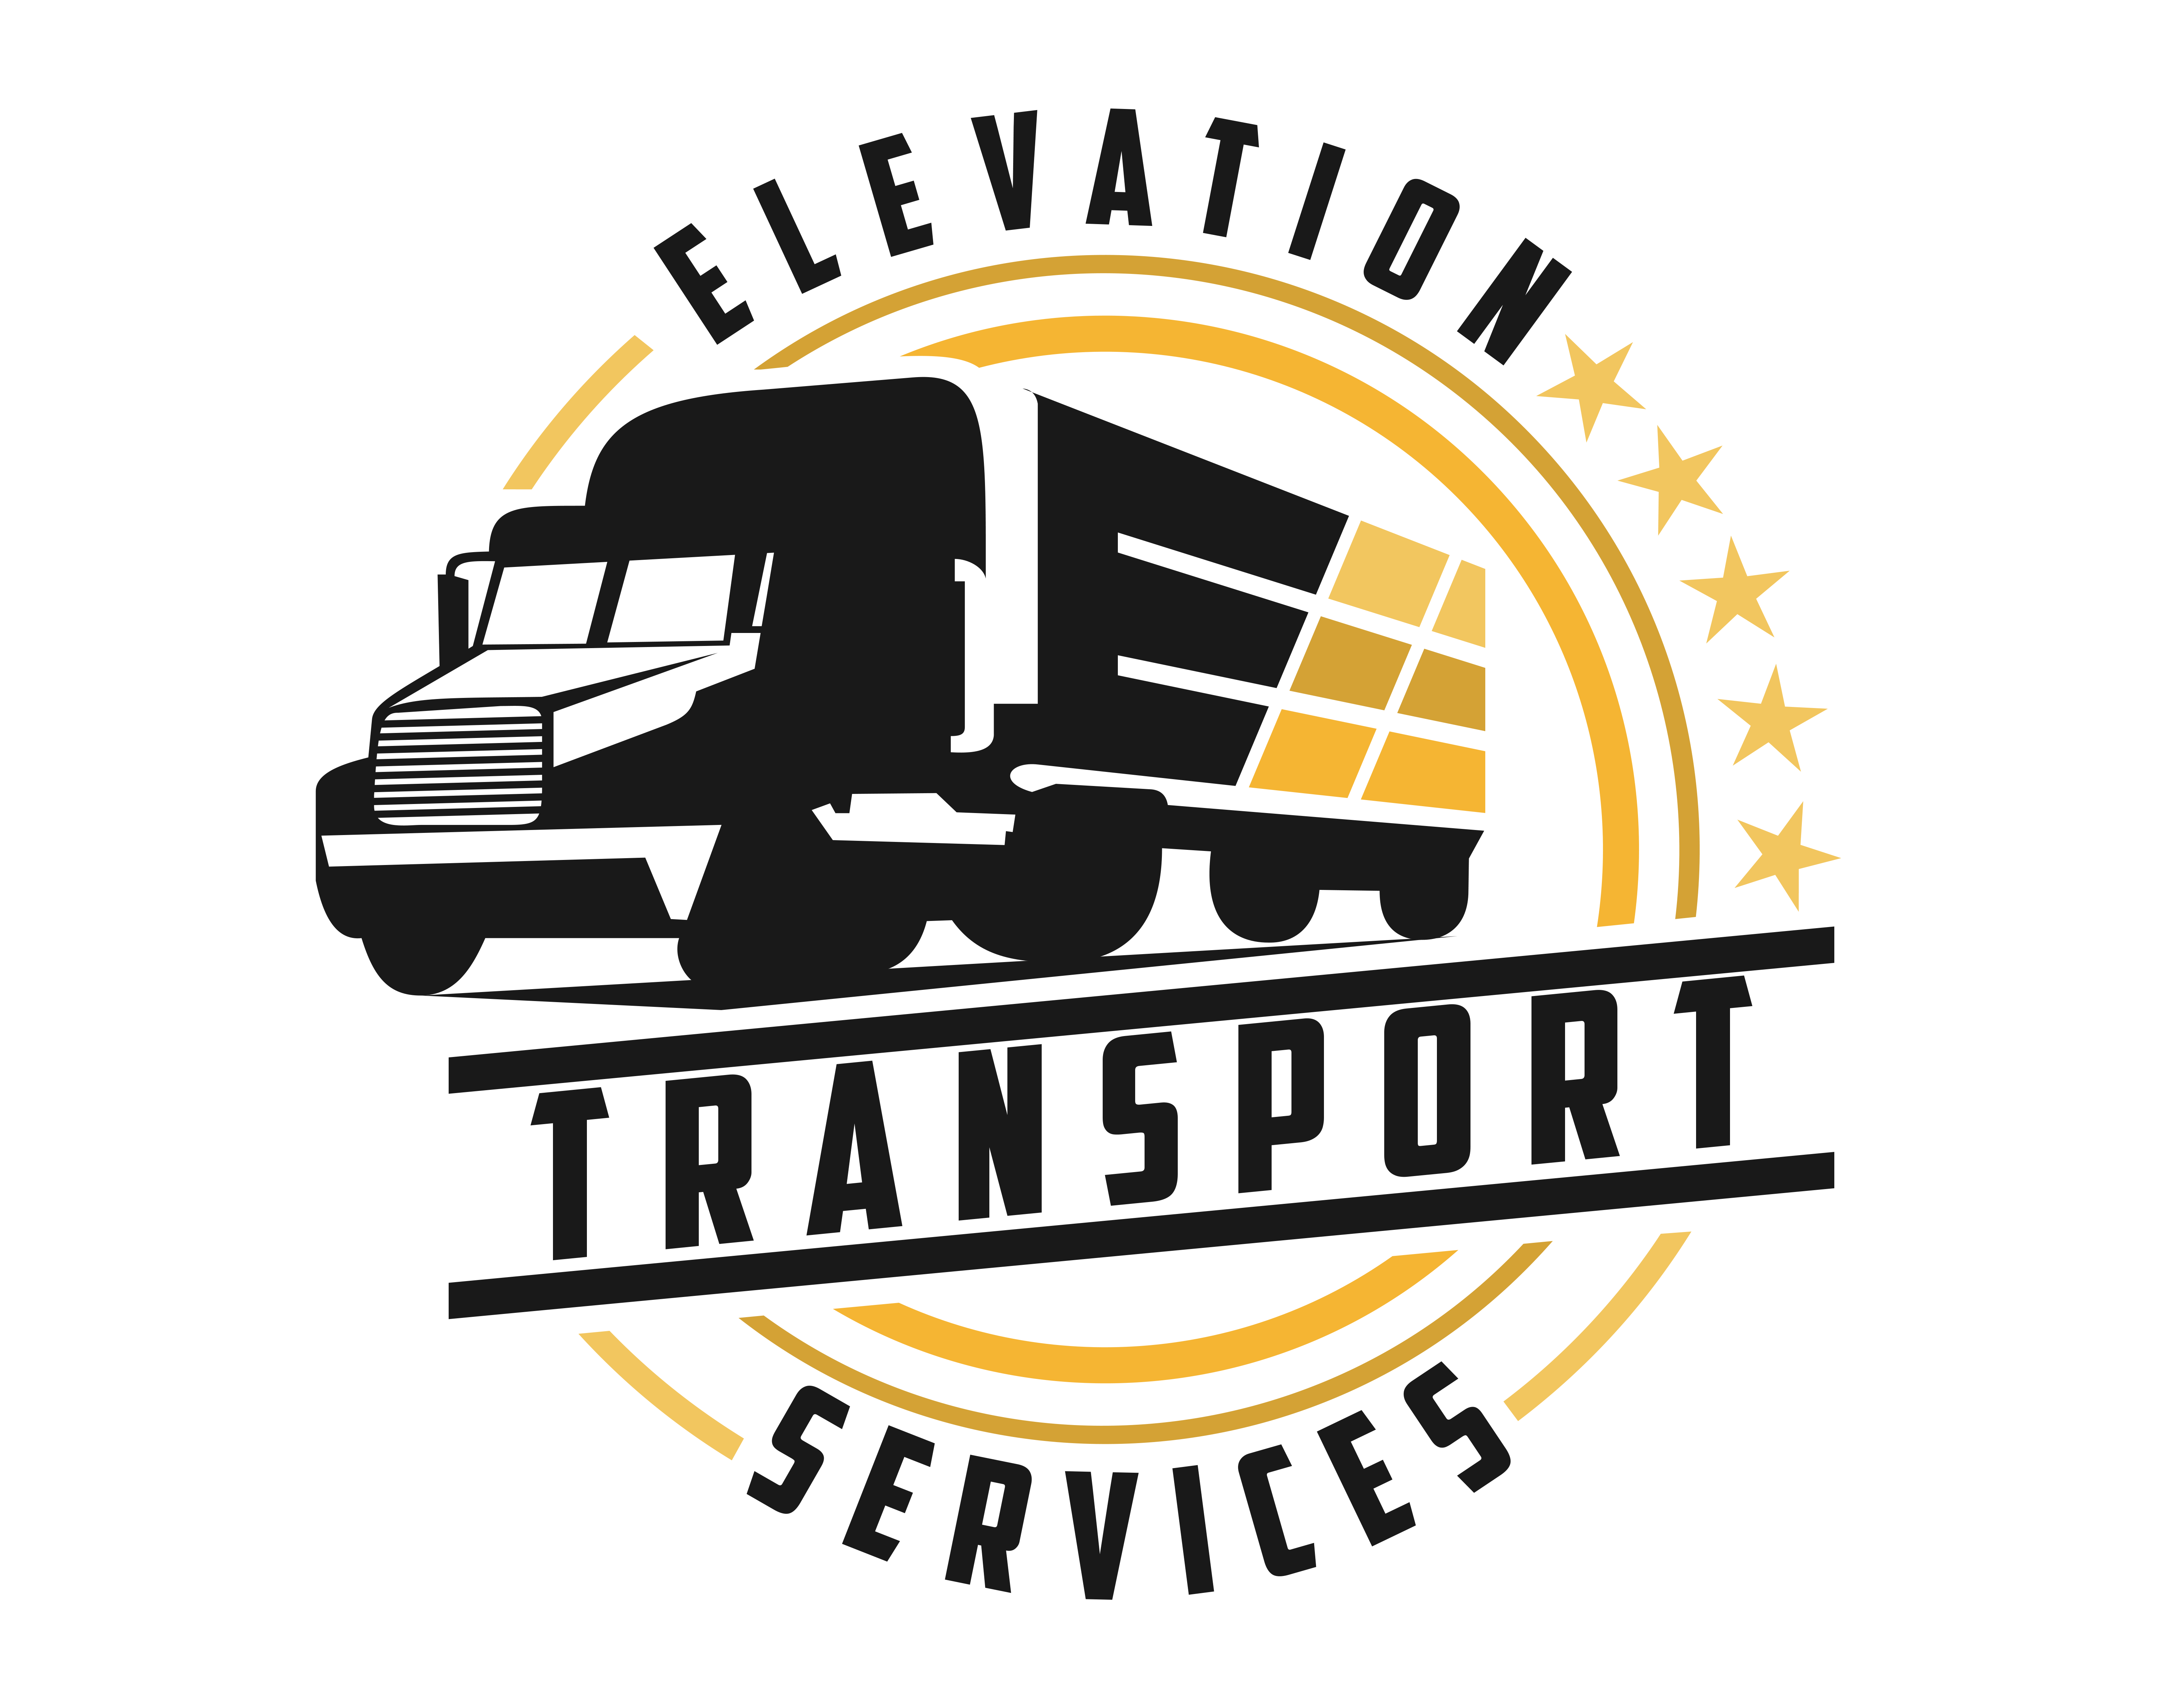 Elevation Auto Transport Services Earns Customer’s Trust with Focused Approach to Moving Vehicles 